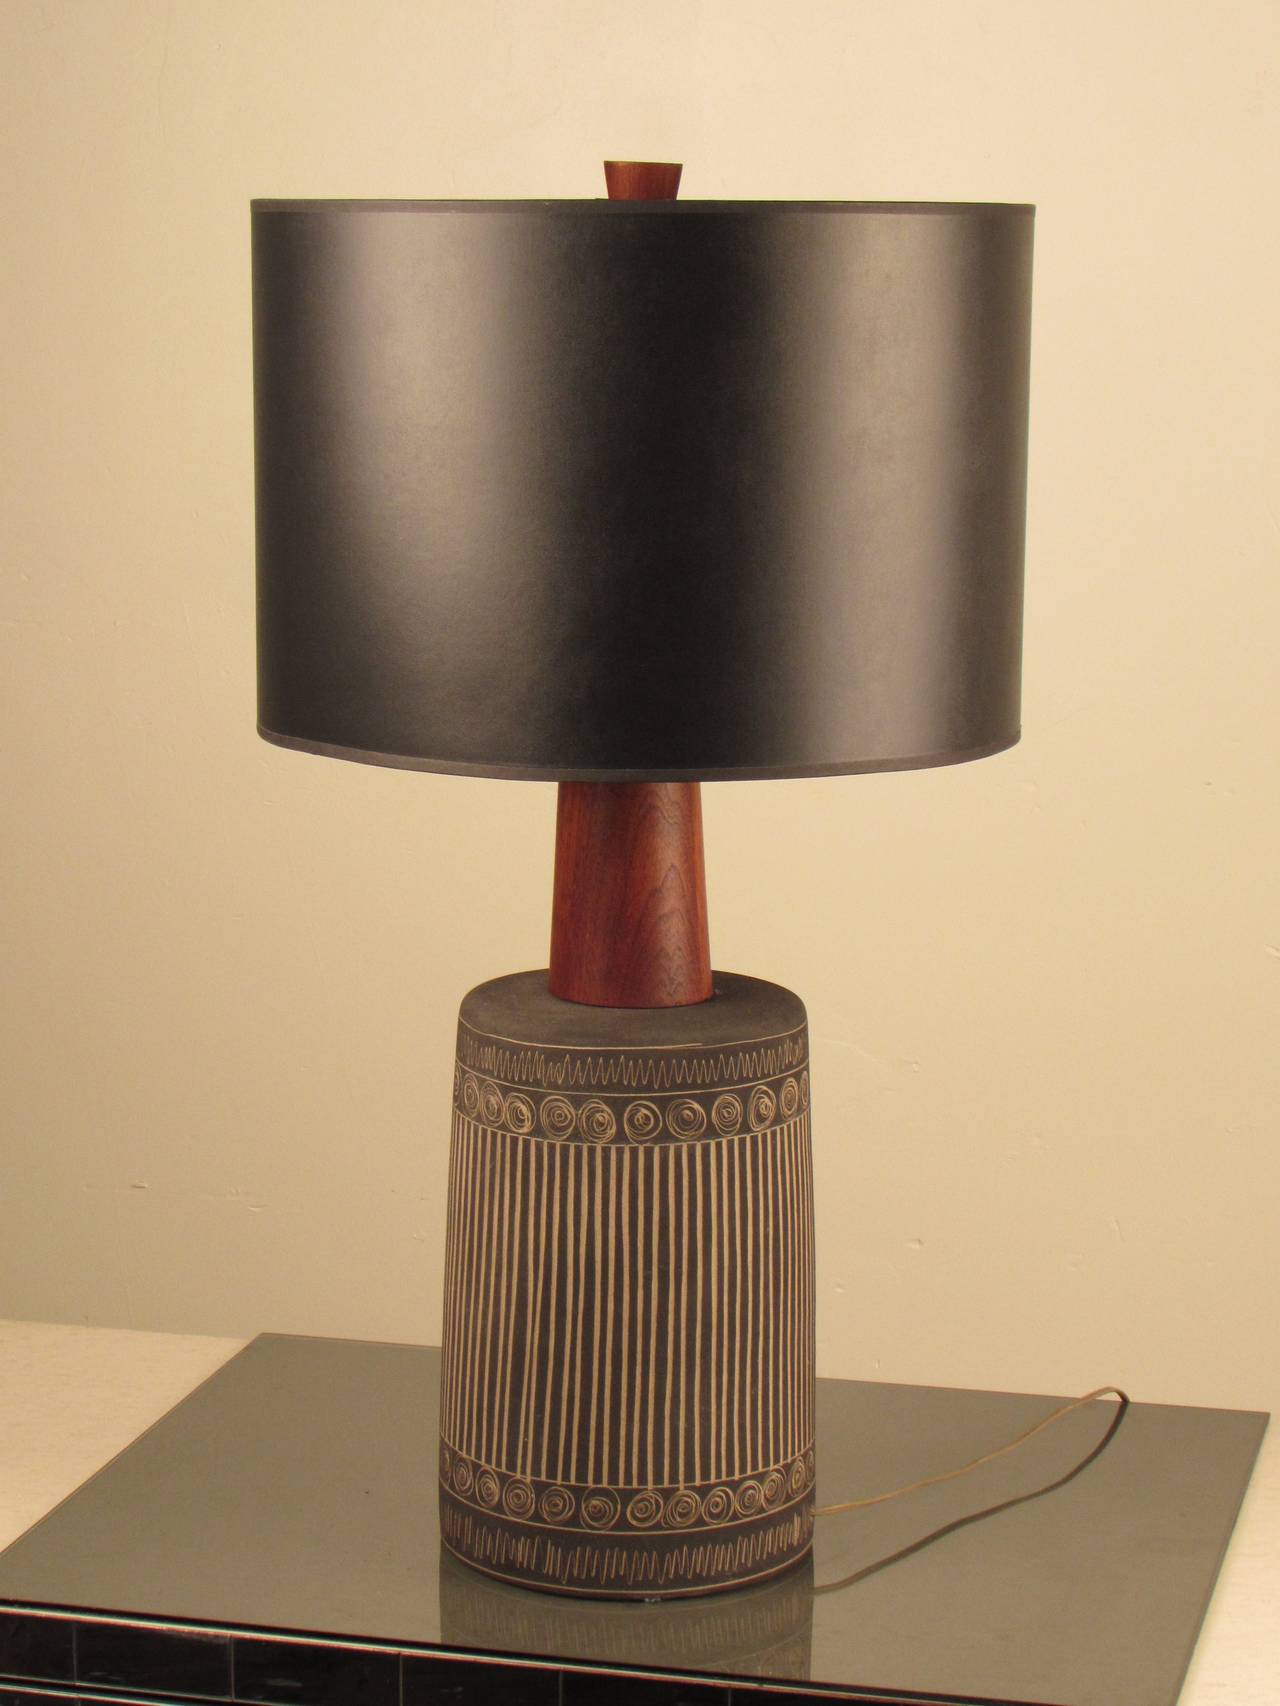 Incomparable Gordon + Jane Martz Lamp with Incised Decoration 2